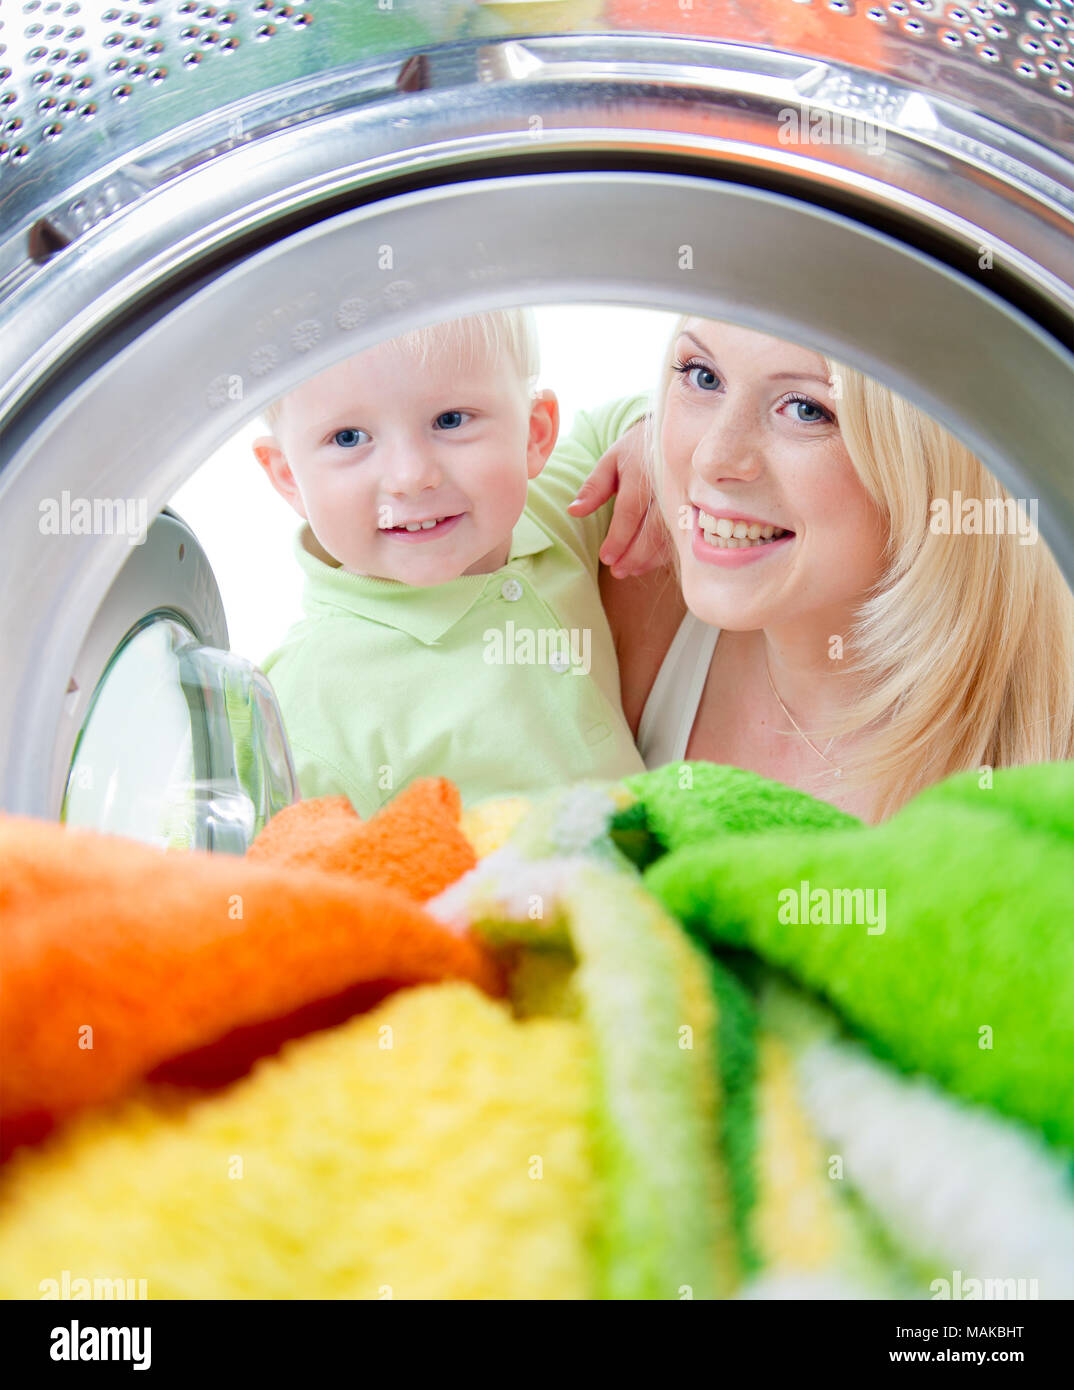 happy kid and mother looking inside wash machine with interest Stock Photo